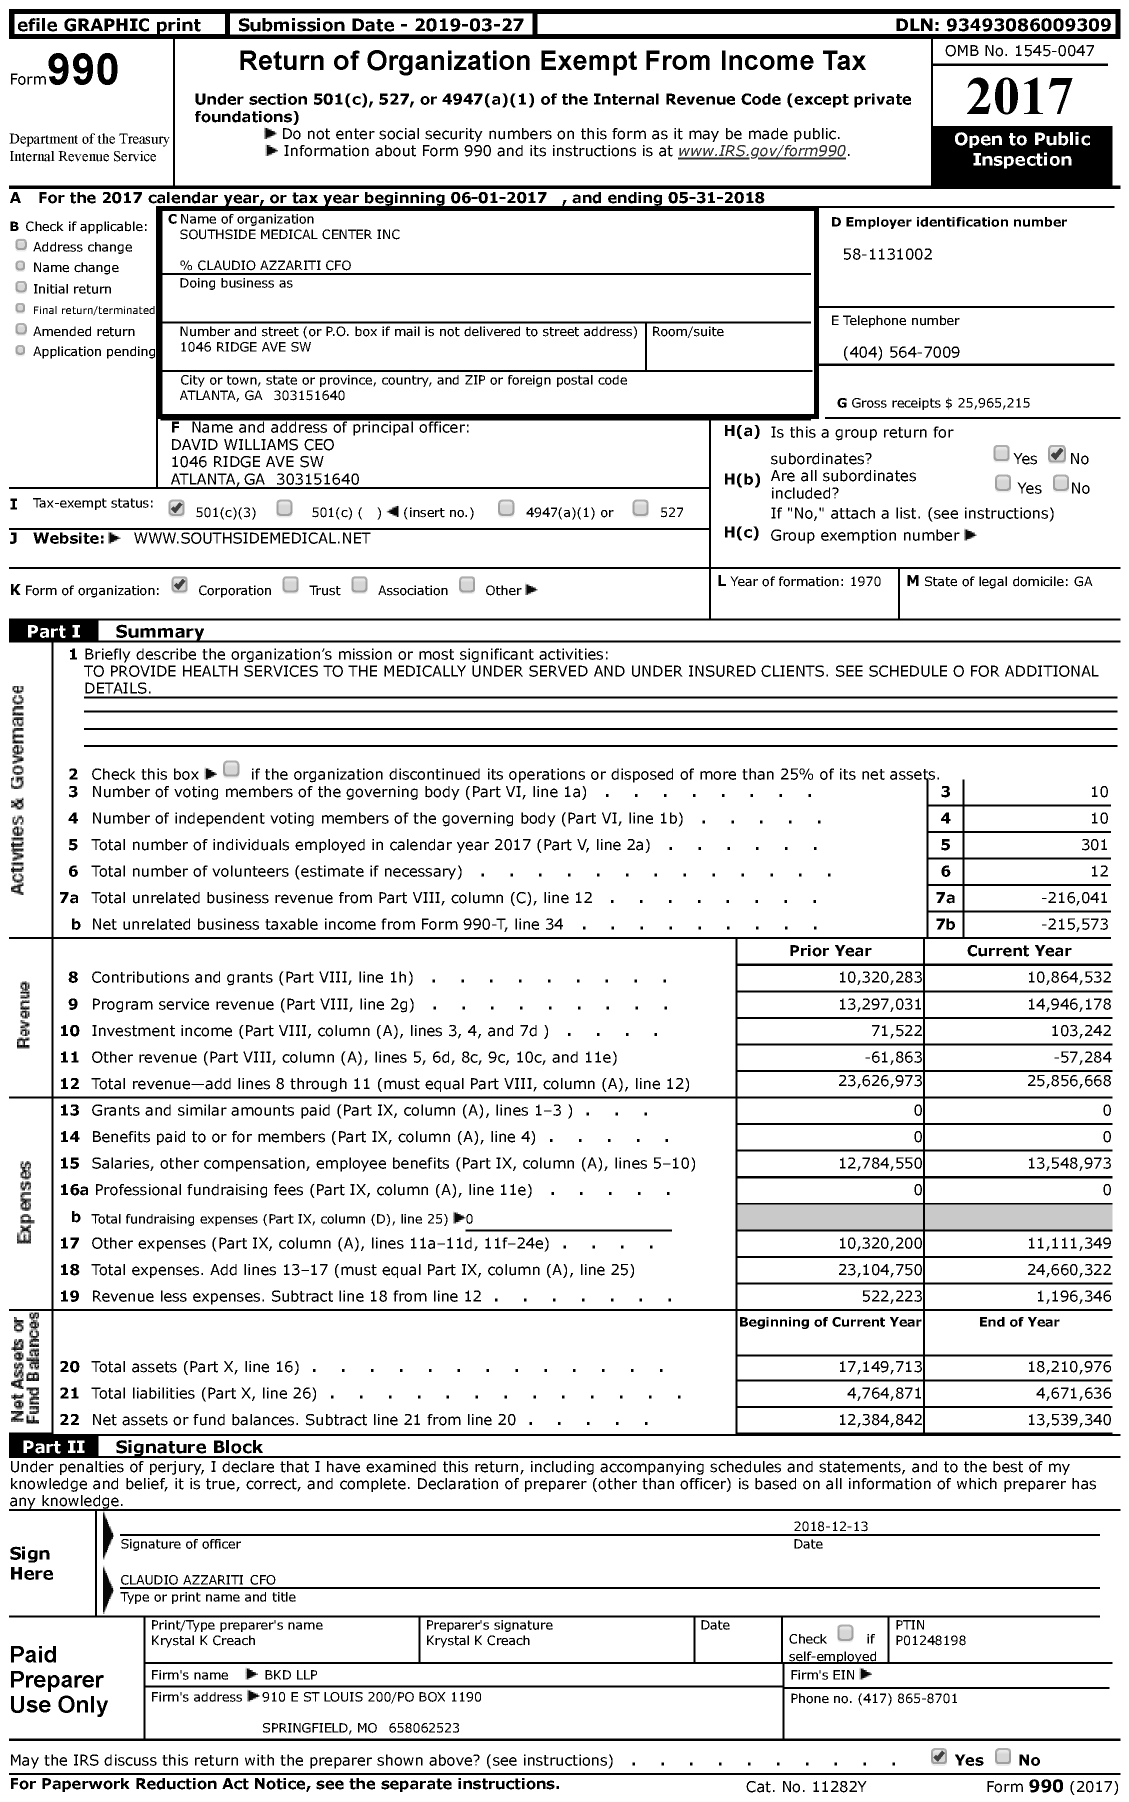 Image of first page of 2017 Form 990 for Southside Medical Center (SMC)